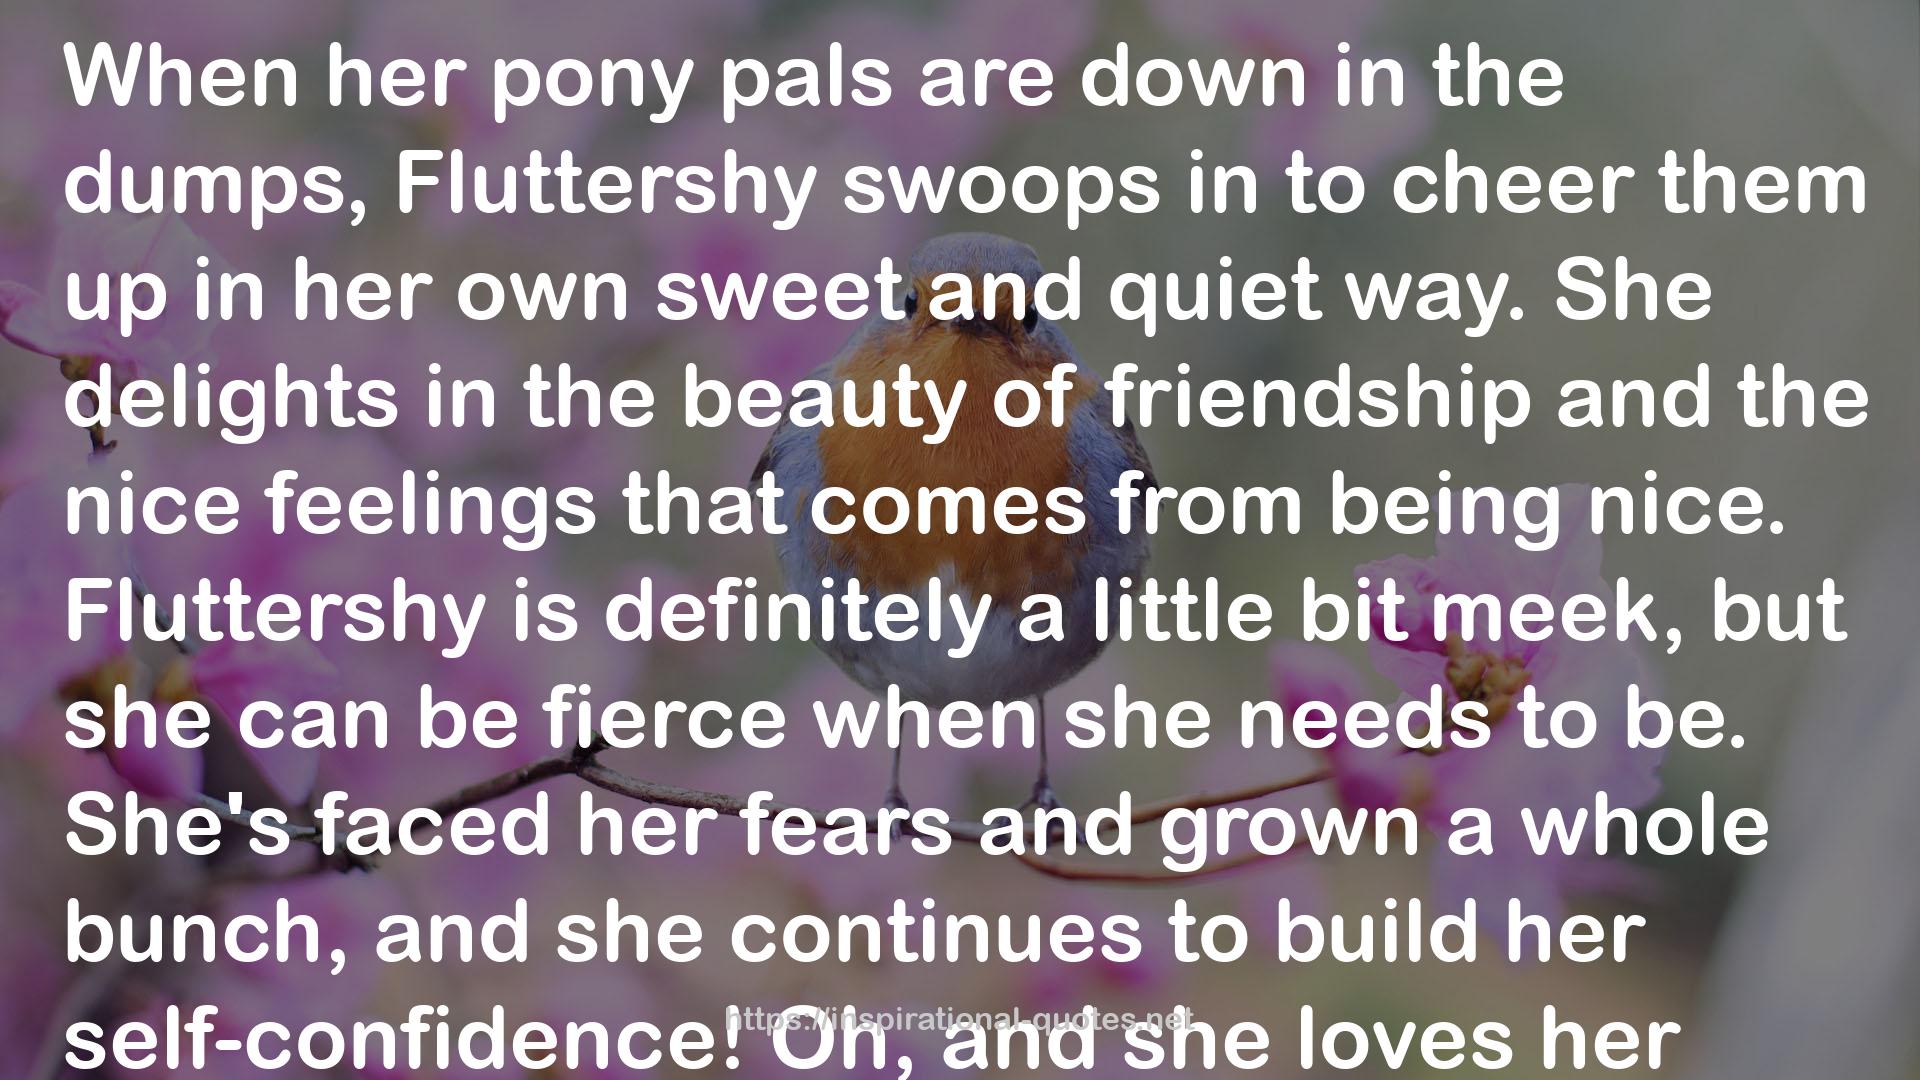 her pony pals  QUOTES